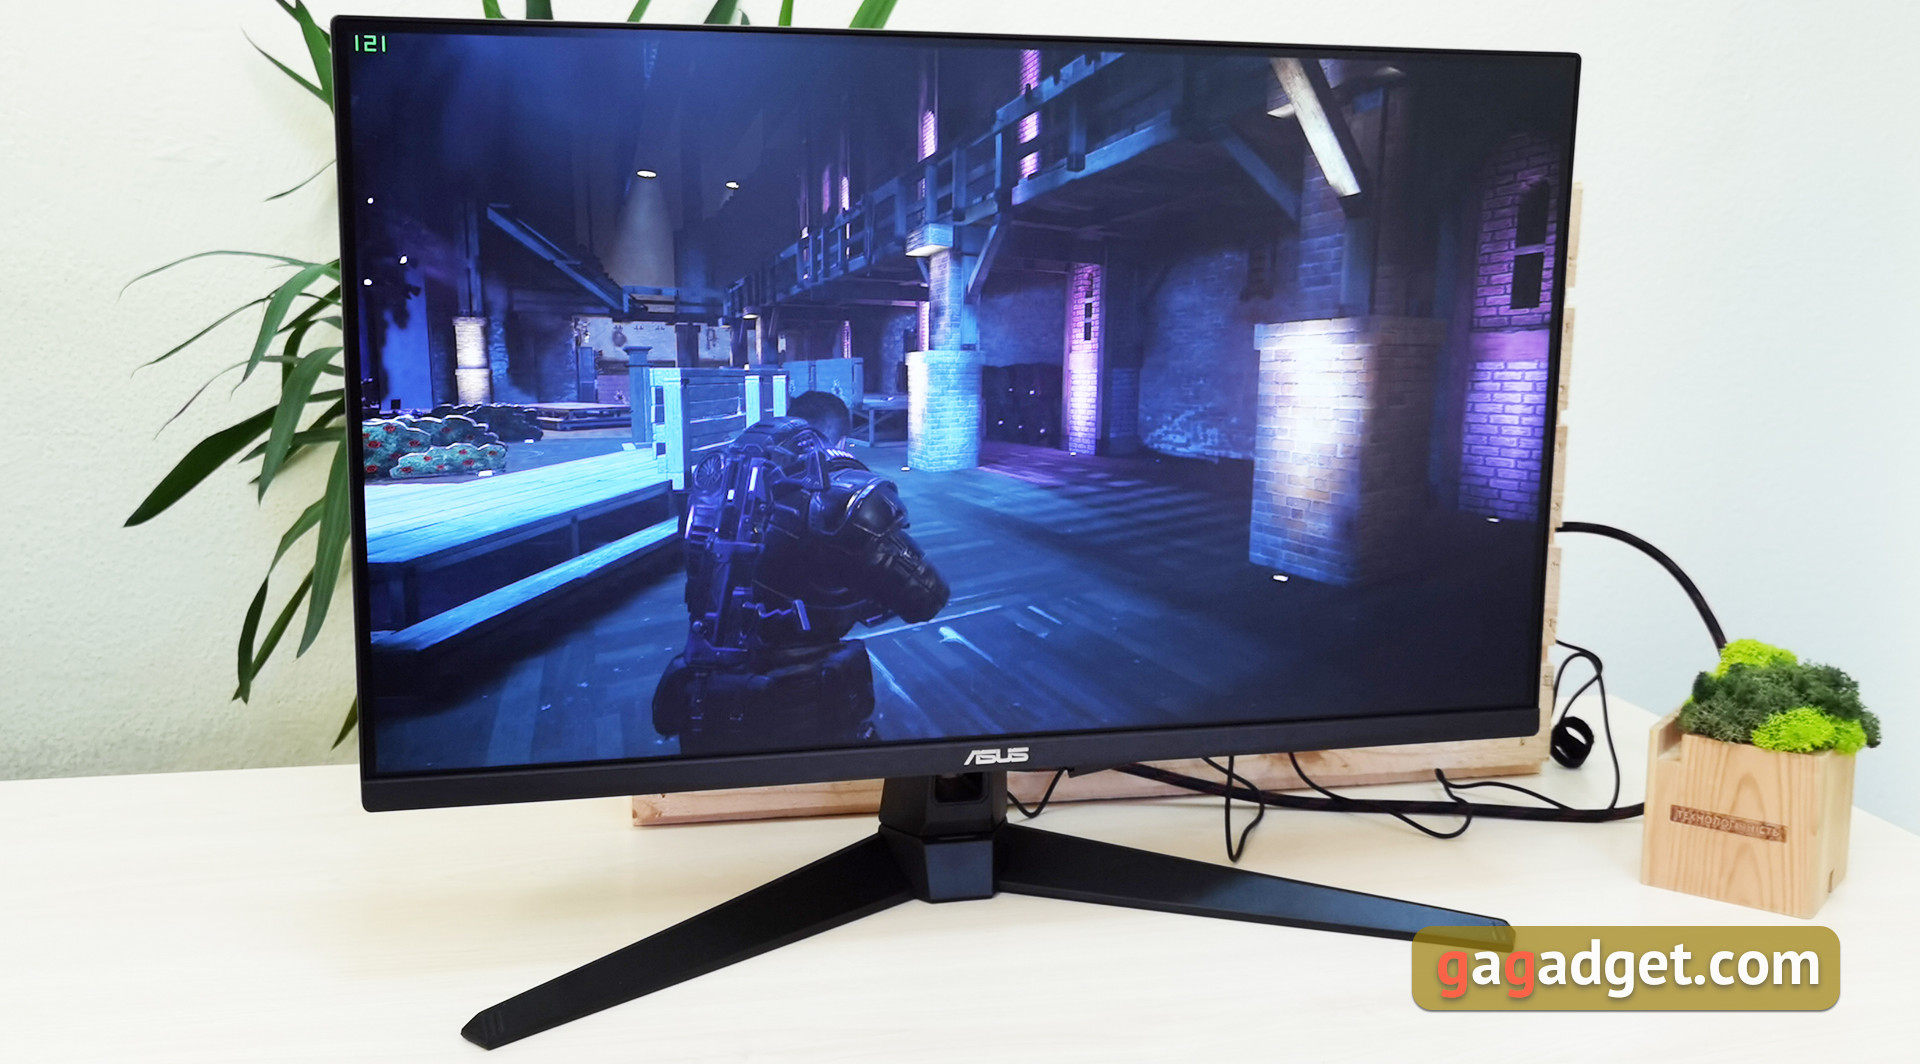 165 panel and ASUS Hz with review: VG279Q1A rate 27-inch monitor Gaming TUF IPS refresh gaming